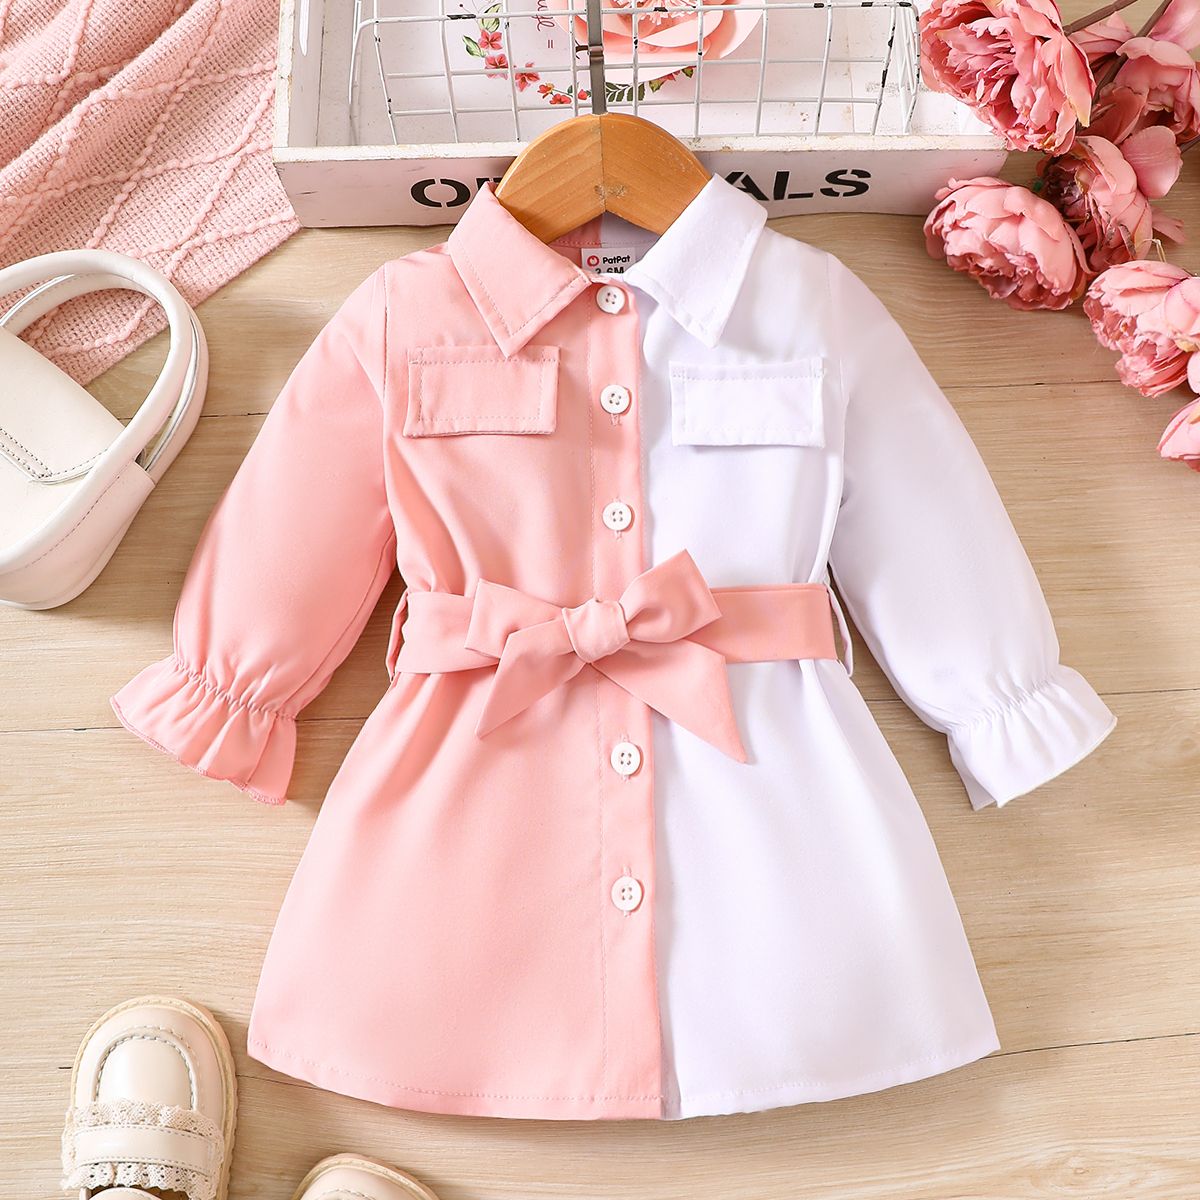 

Baby Girl Two Tone Belted Long-sleeve Shirt Dress